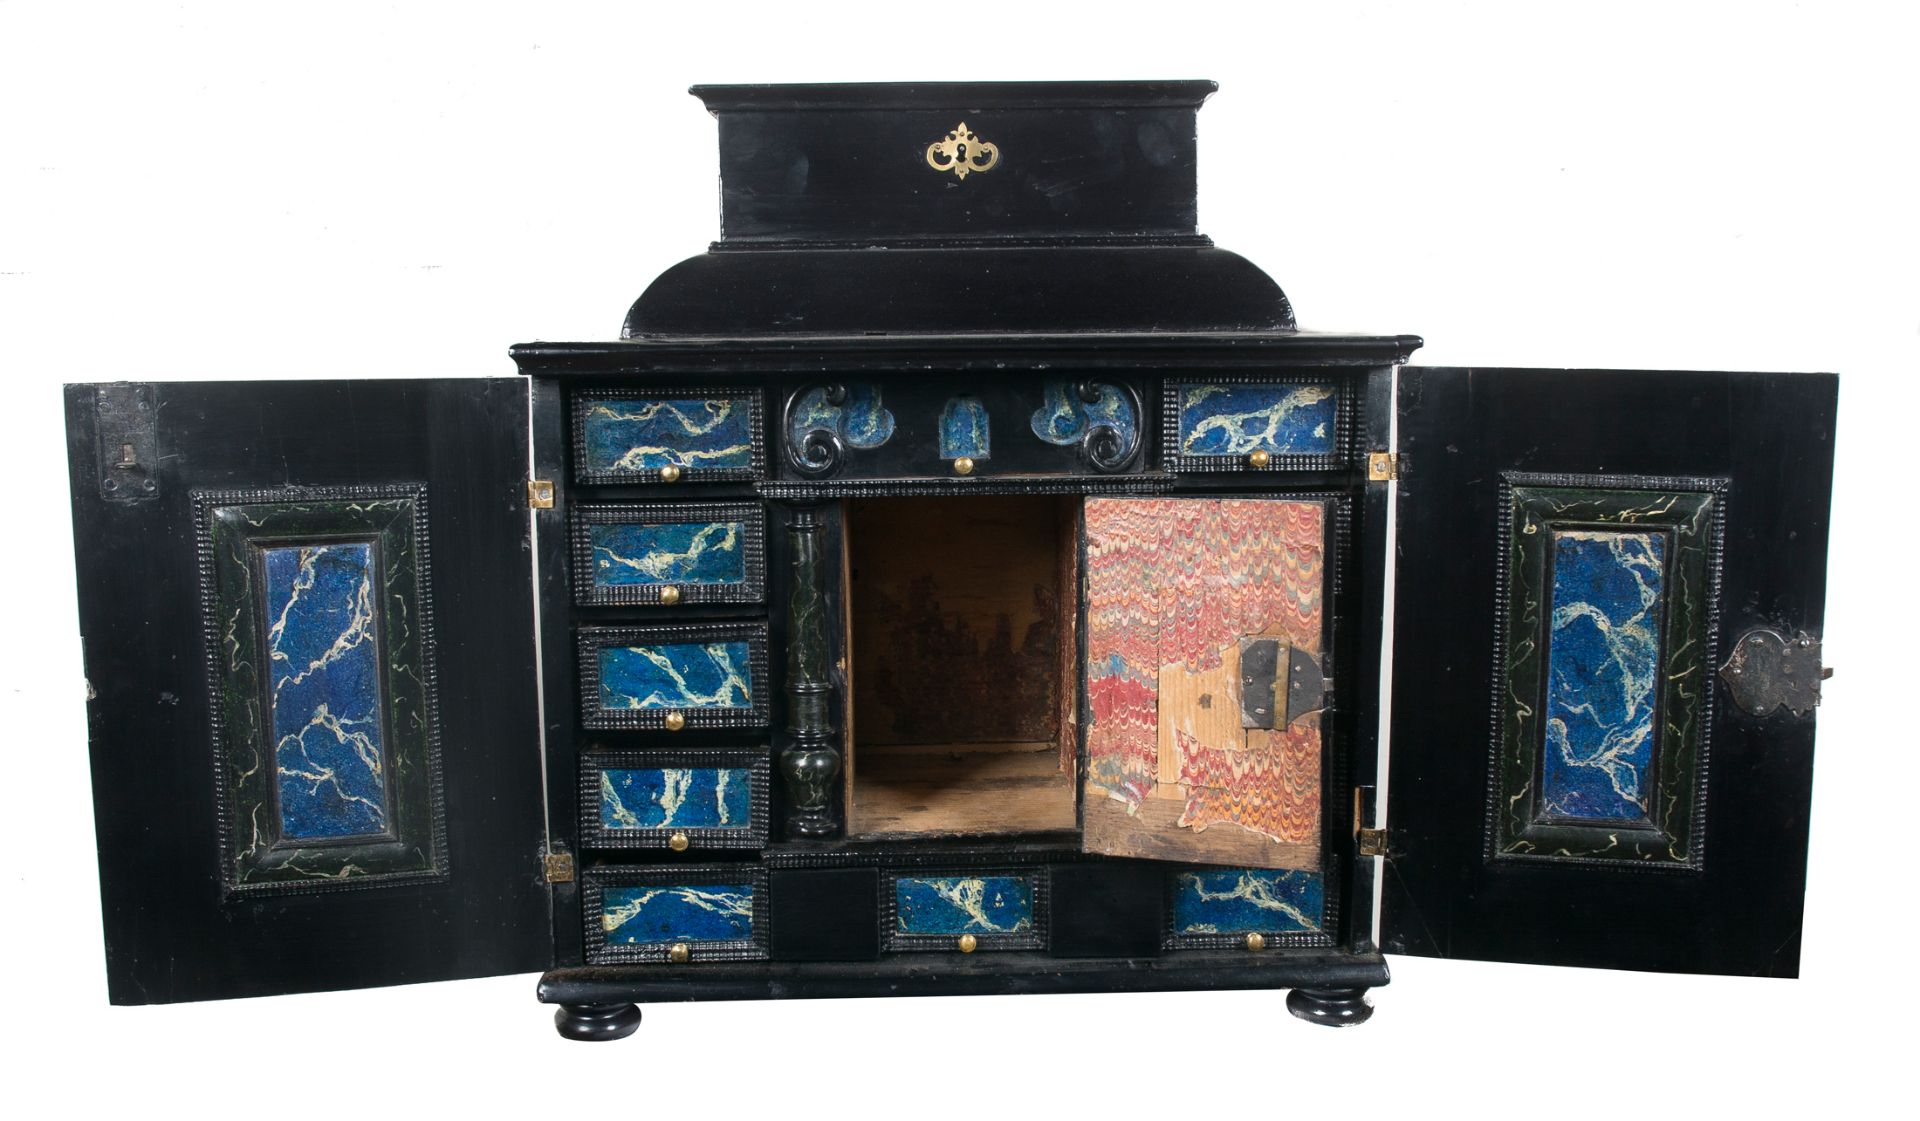 Ebonised and marbled small wooden chest. Flemish workshop. 17th - 18th century. - Bild 3 aus 3